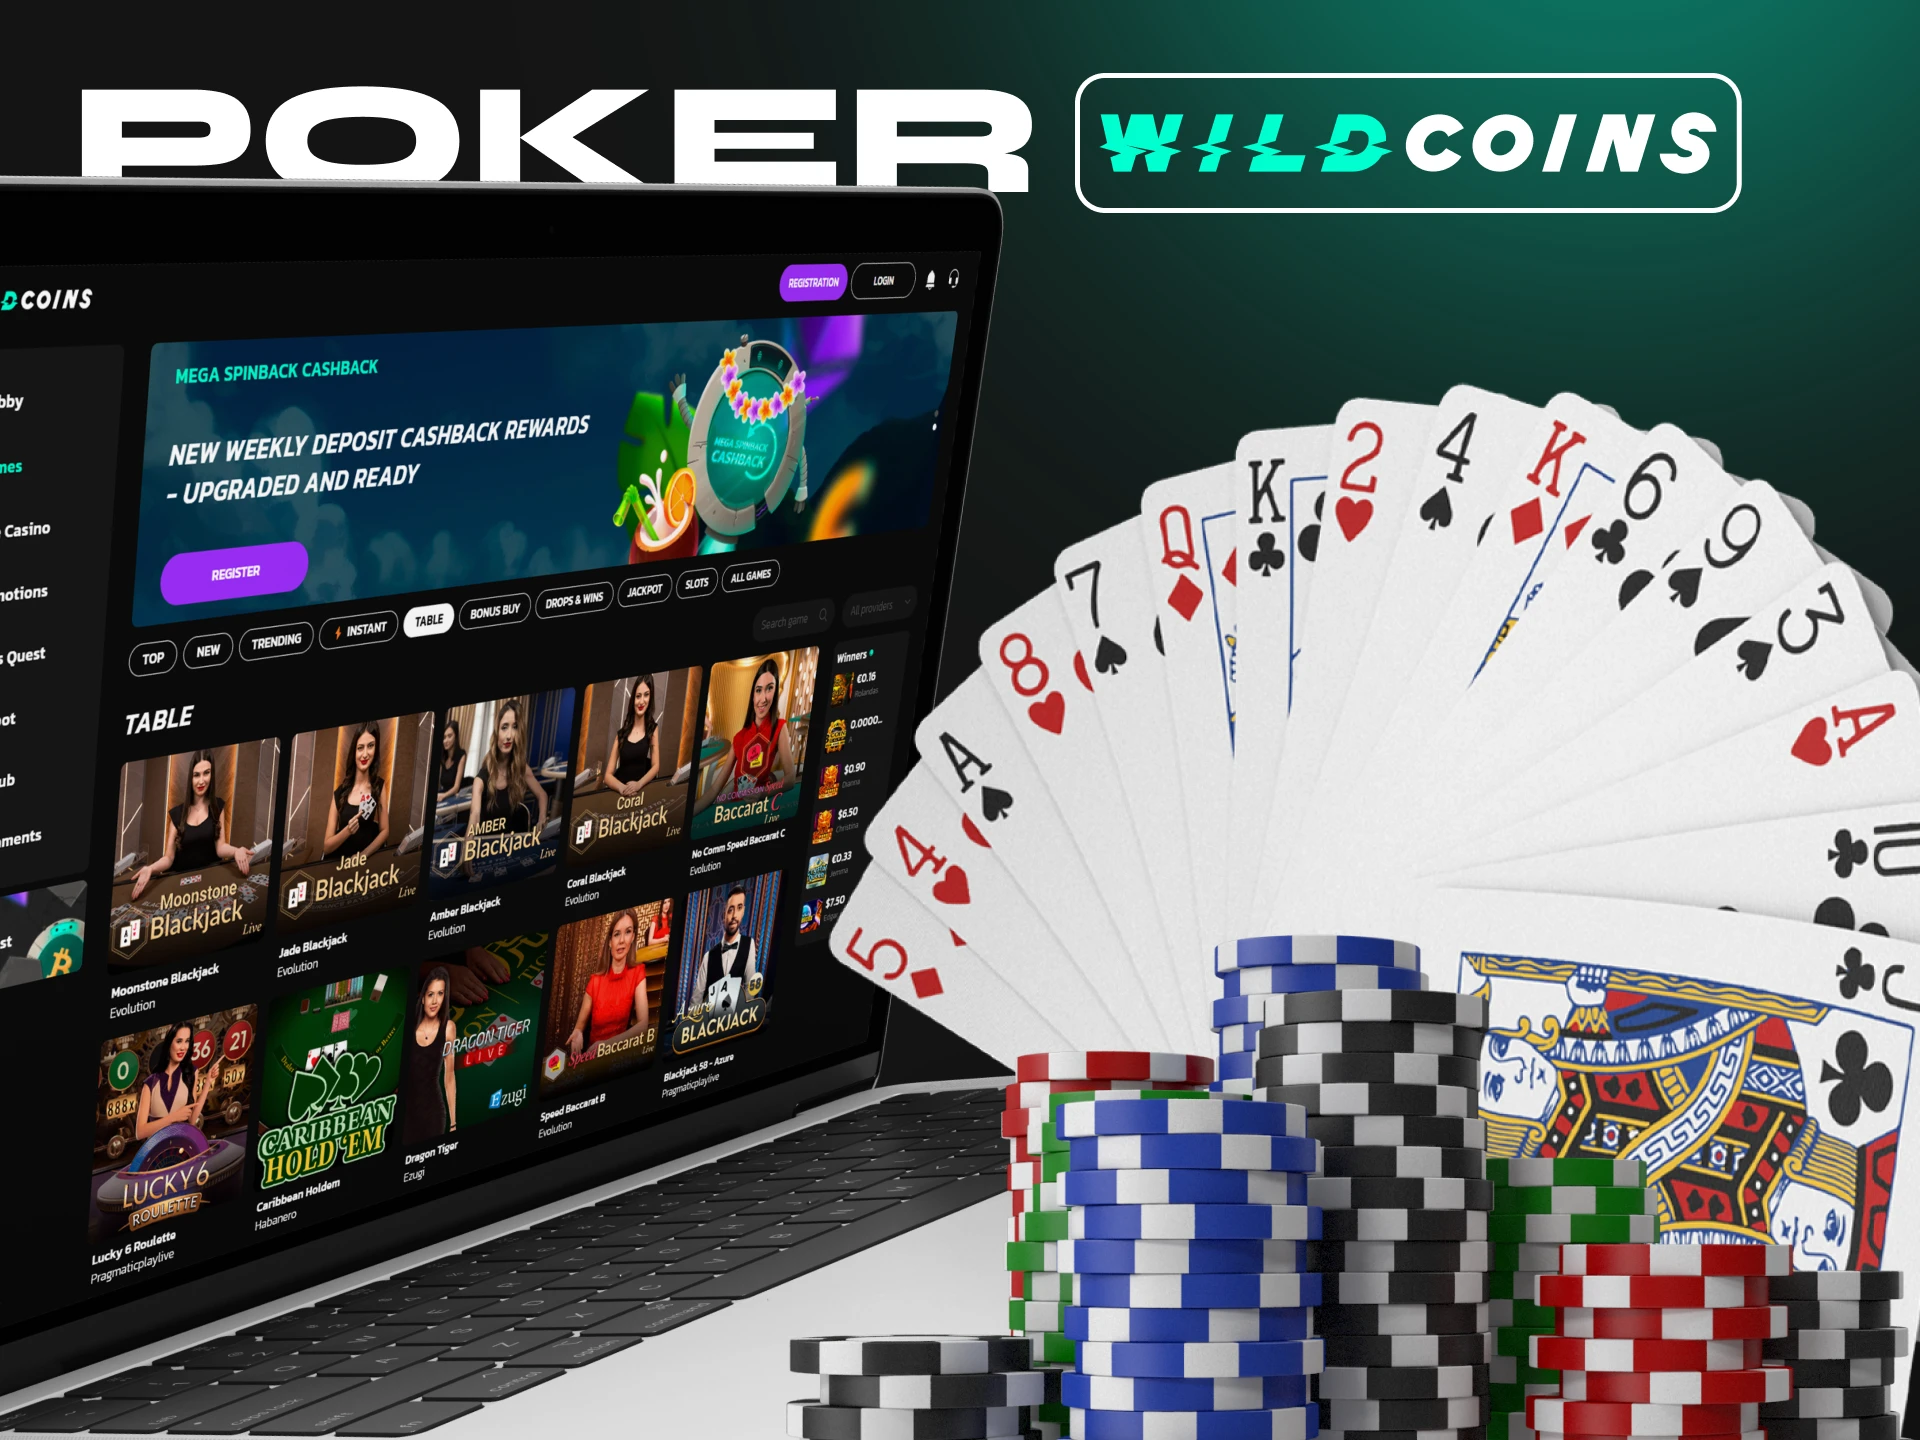 Poker lovers can play it at Wildcions Casino.